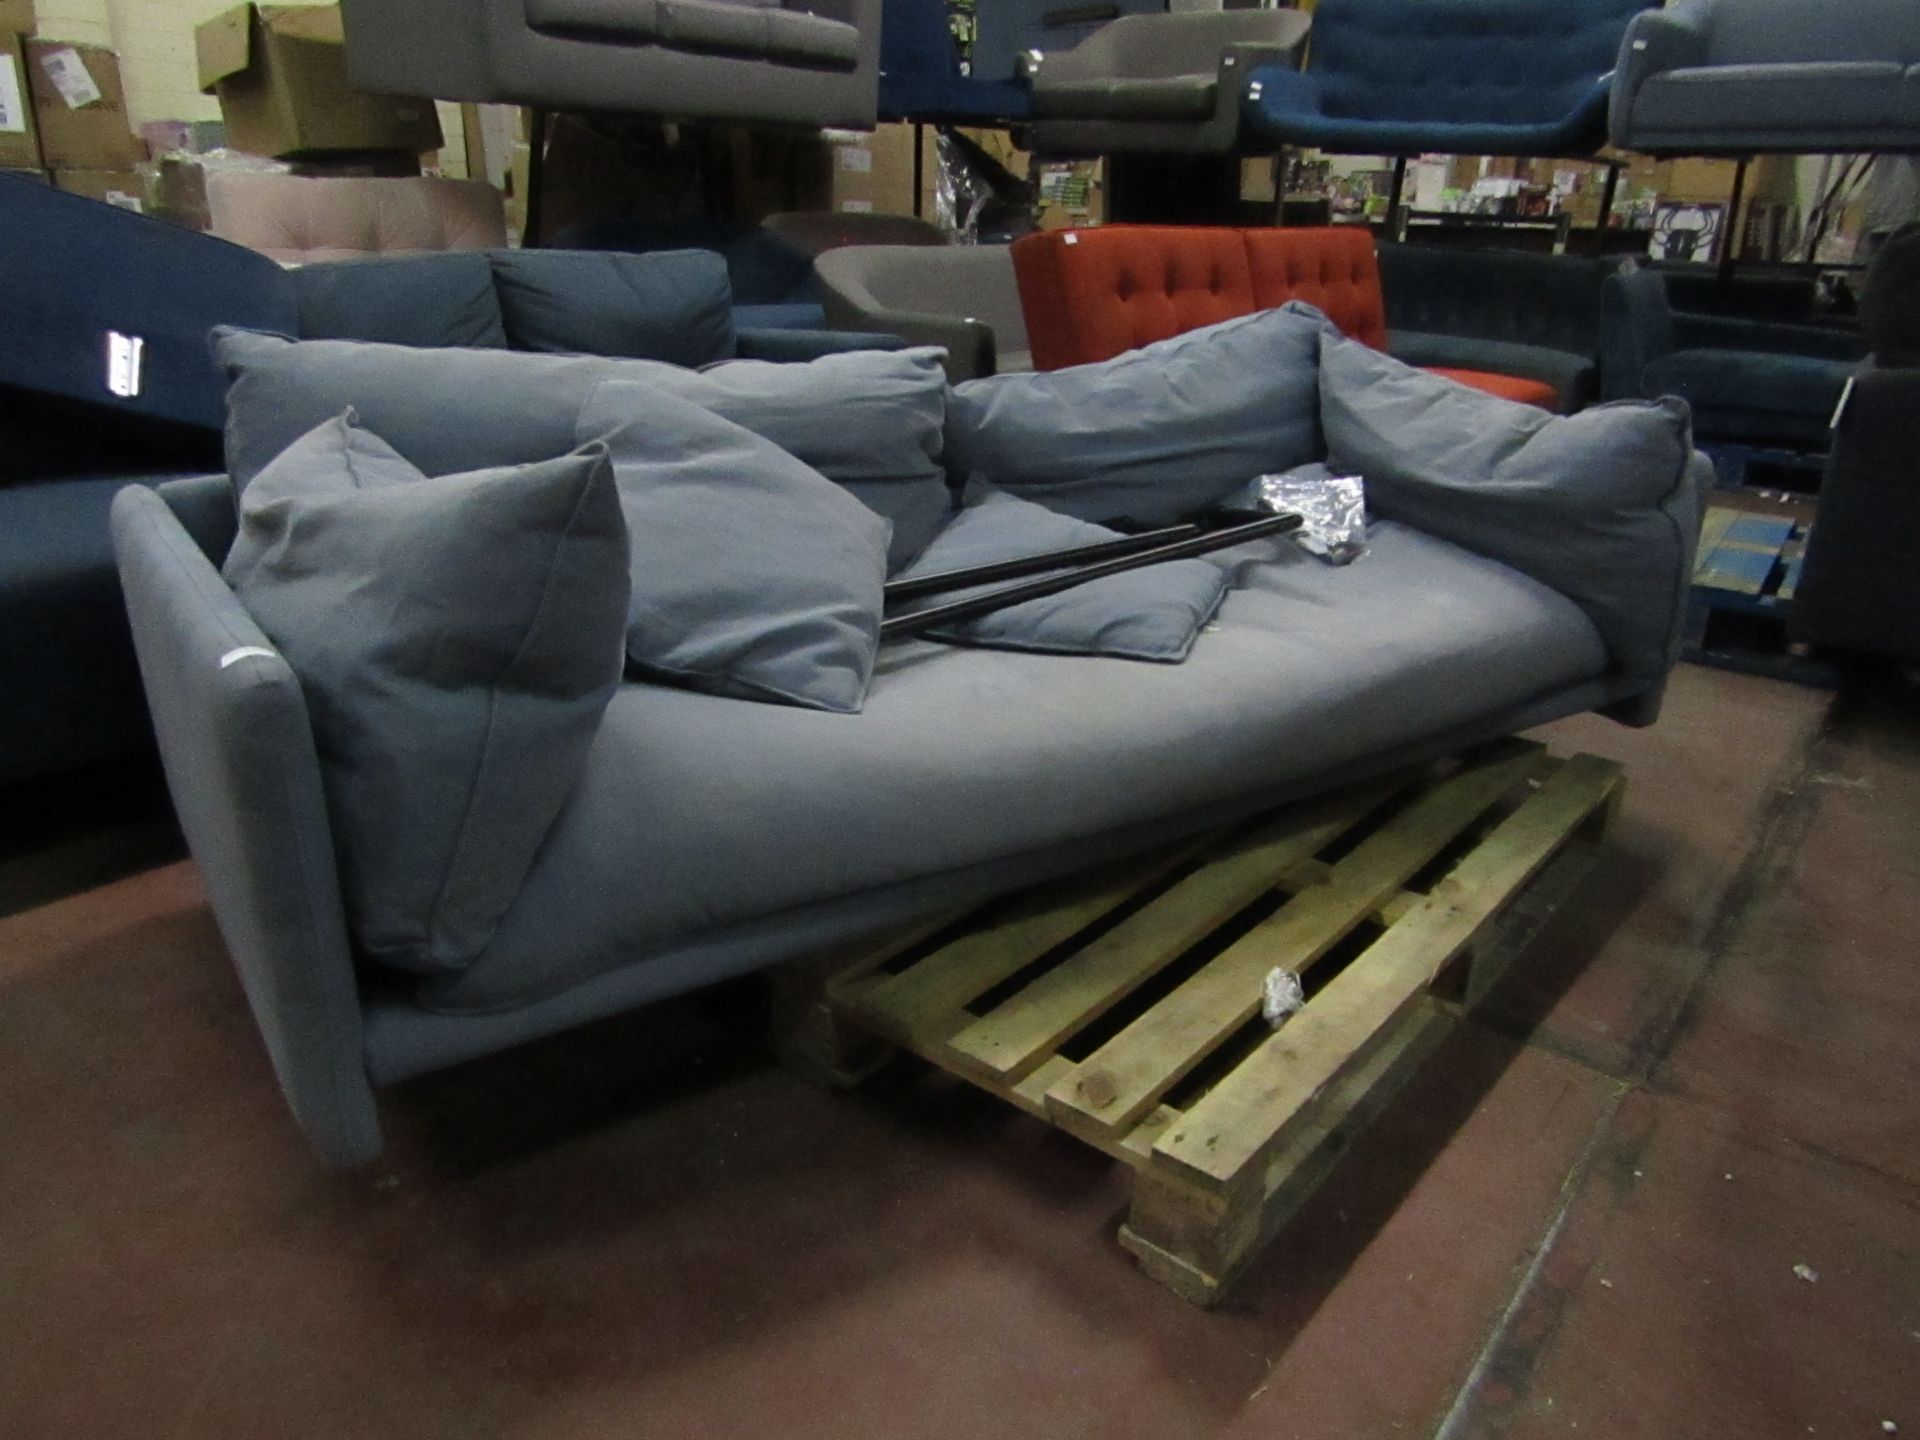 | 1x | MADE.COM 2 SEATER SOFA | BLUE | GOOD CONDITION JUST NEEDS A GOOD CLEAN & HAS FEET |